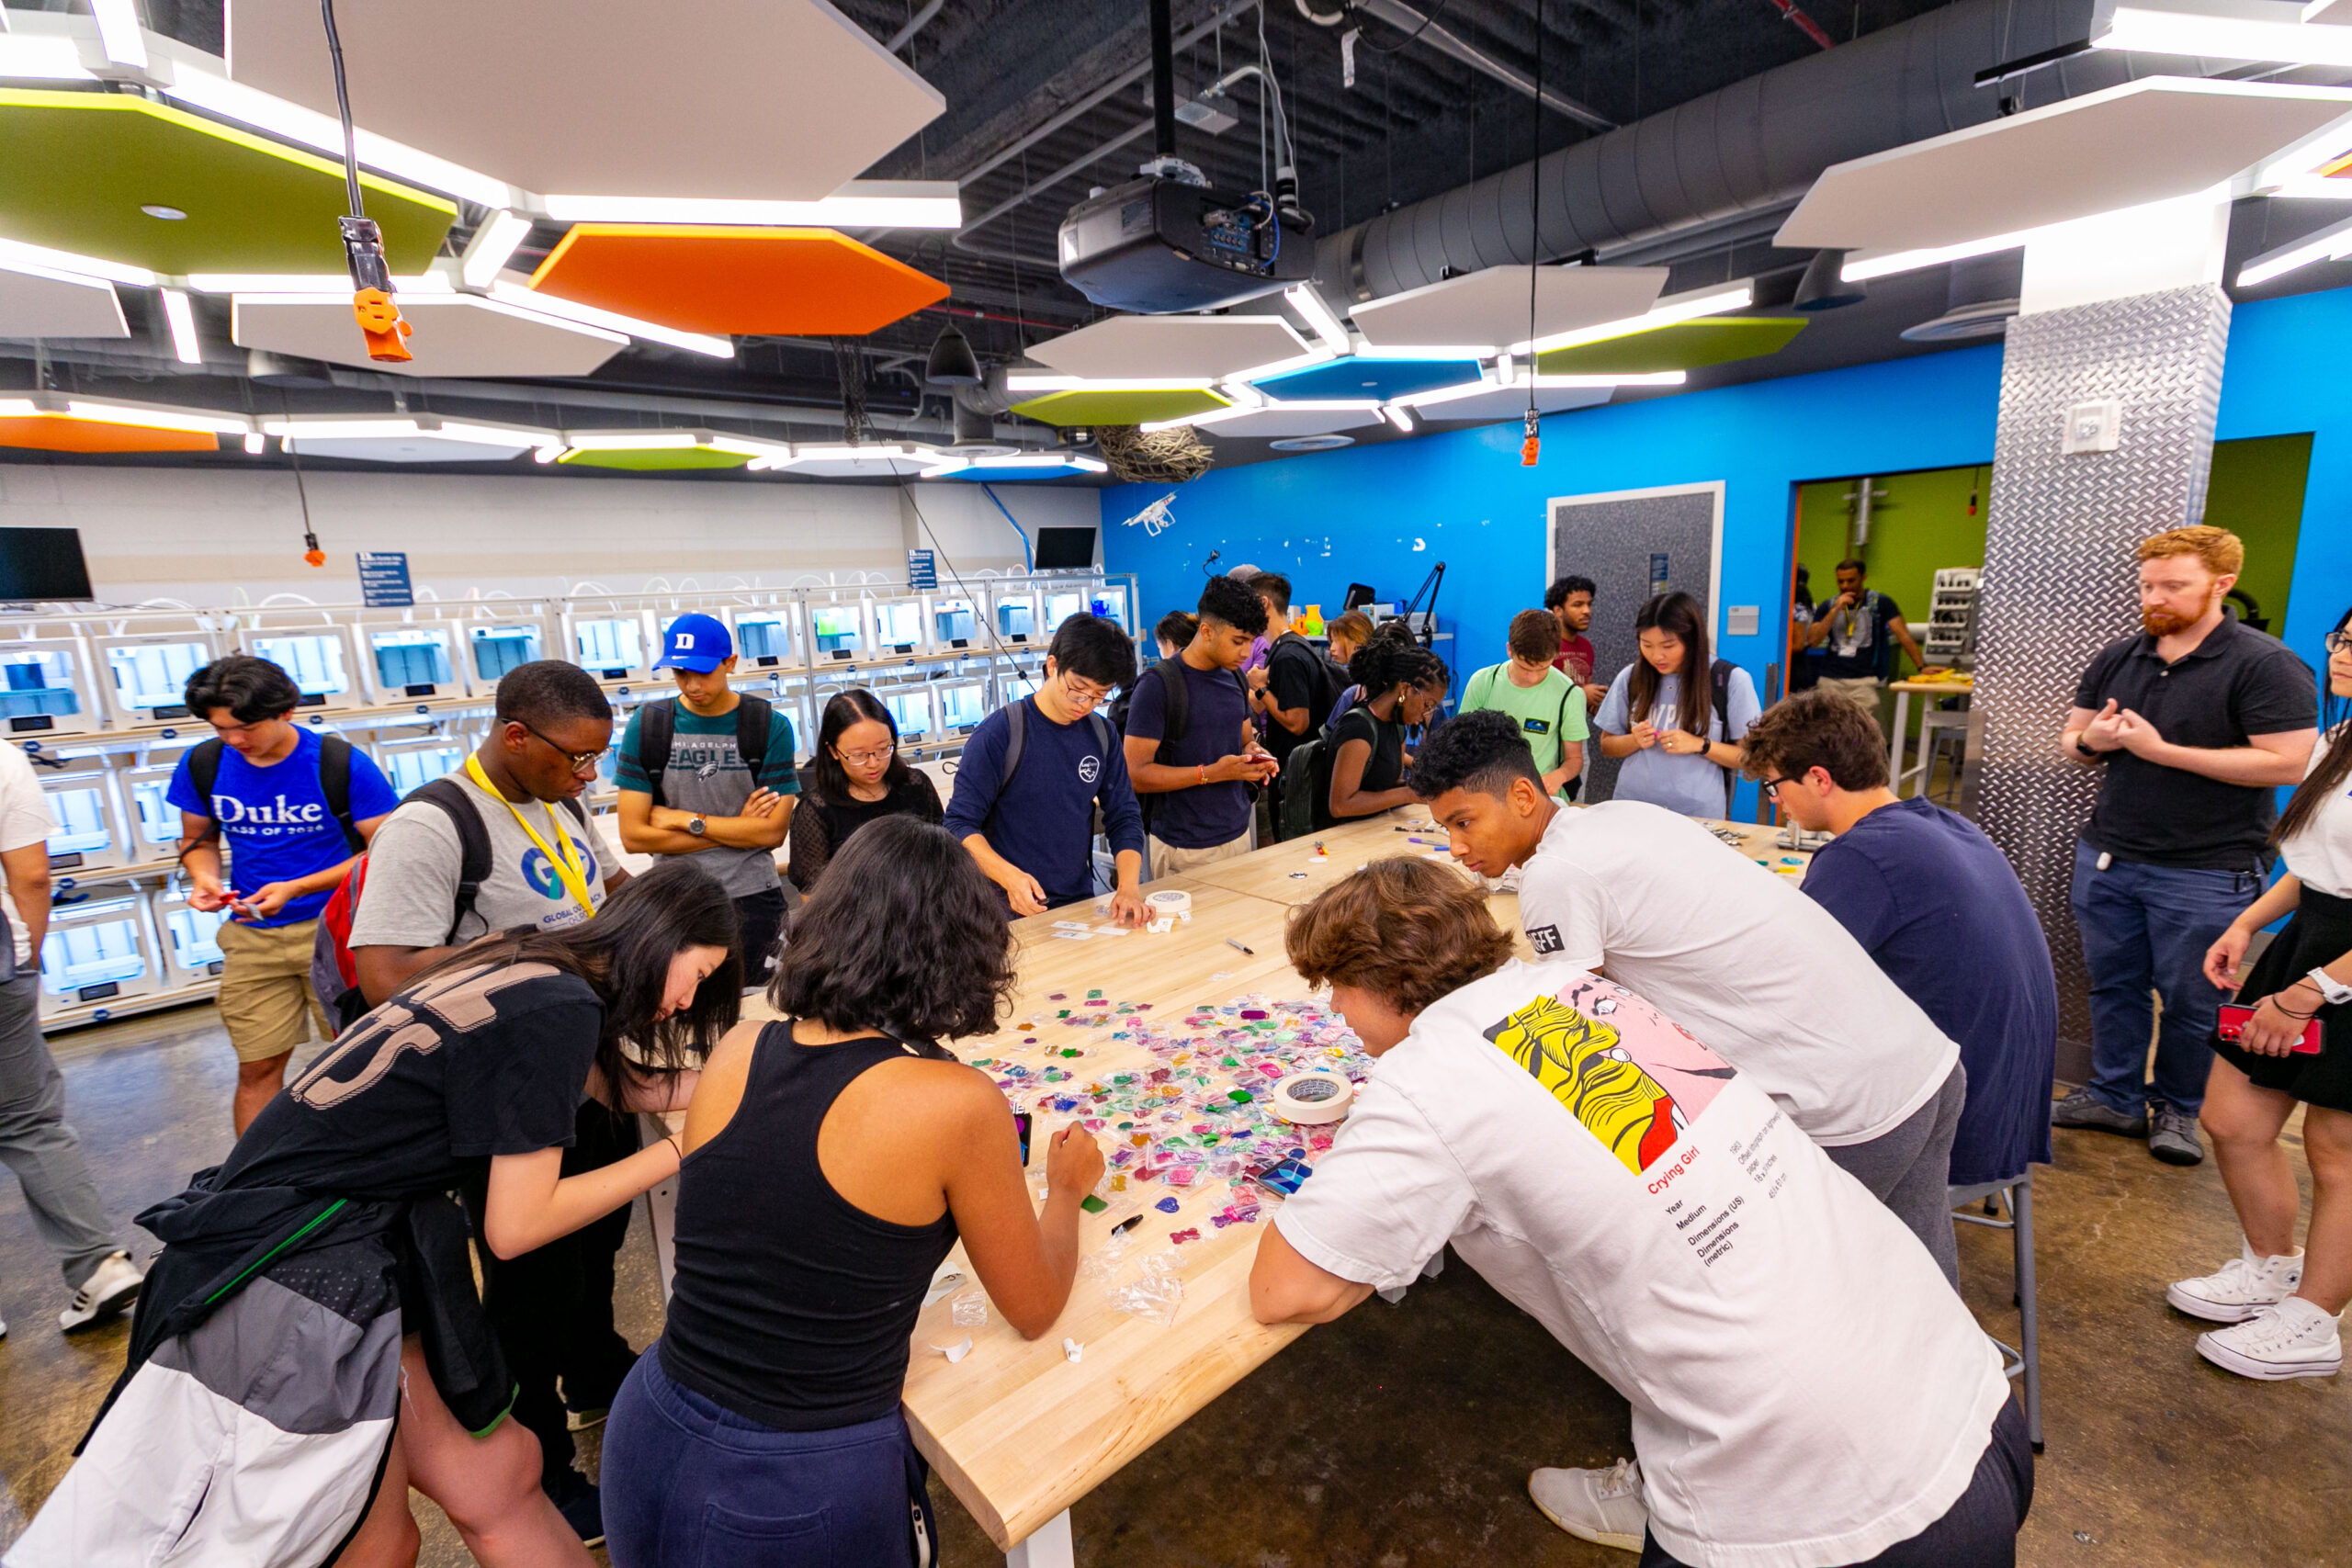 New Duke students who have set their sights on studying STEM spent time in the Innovation Co-Lab during Experiential Orientation, trying out the design and prototyping gear and getting to know like-minded classmates.